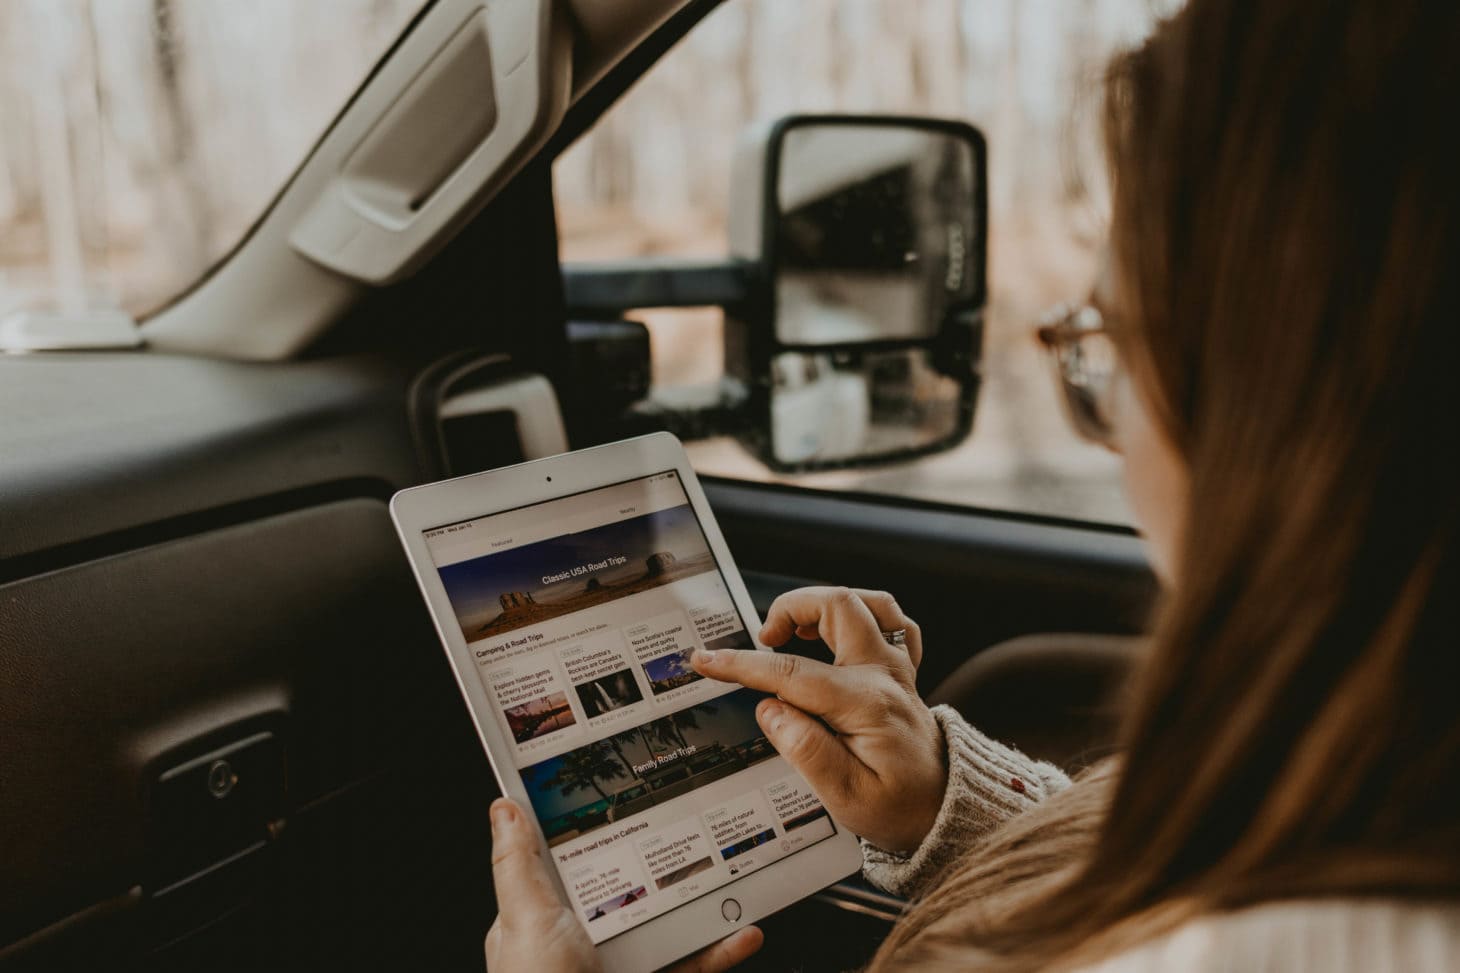 Woman searching for road trip inspiration on iPad while in car